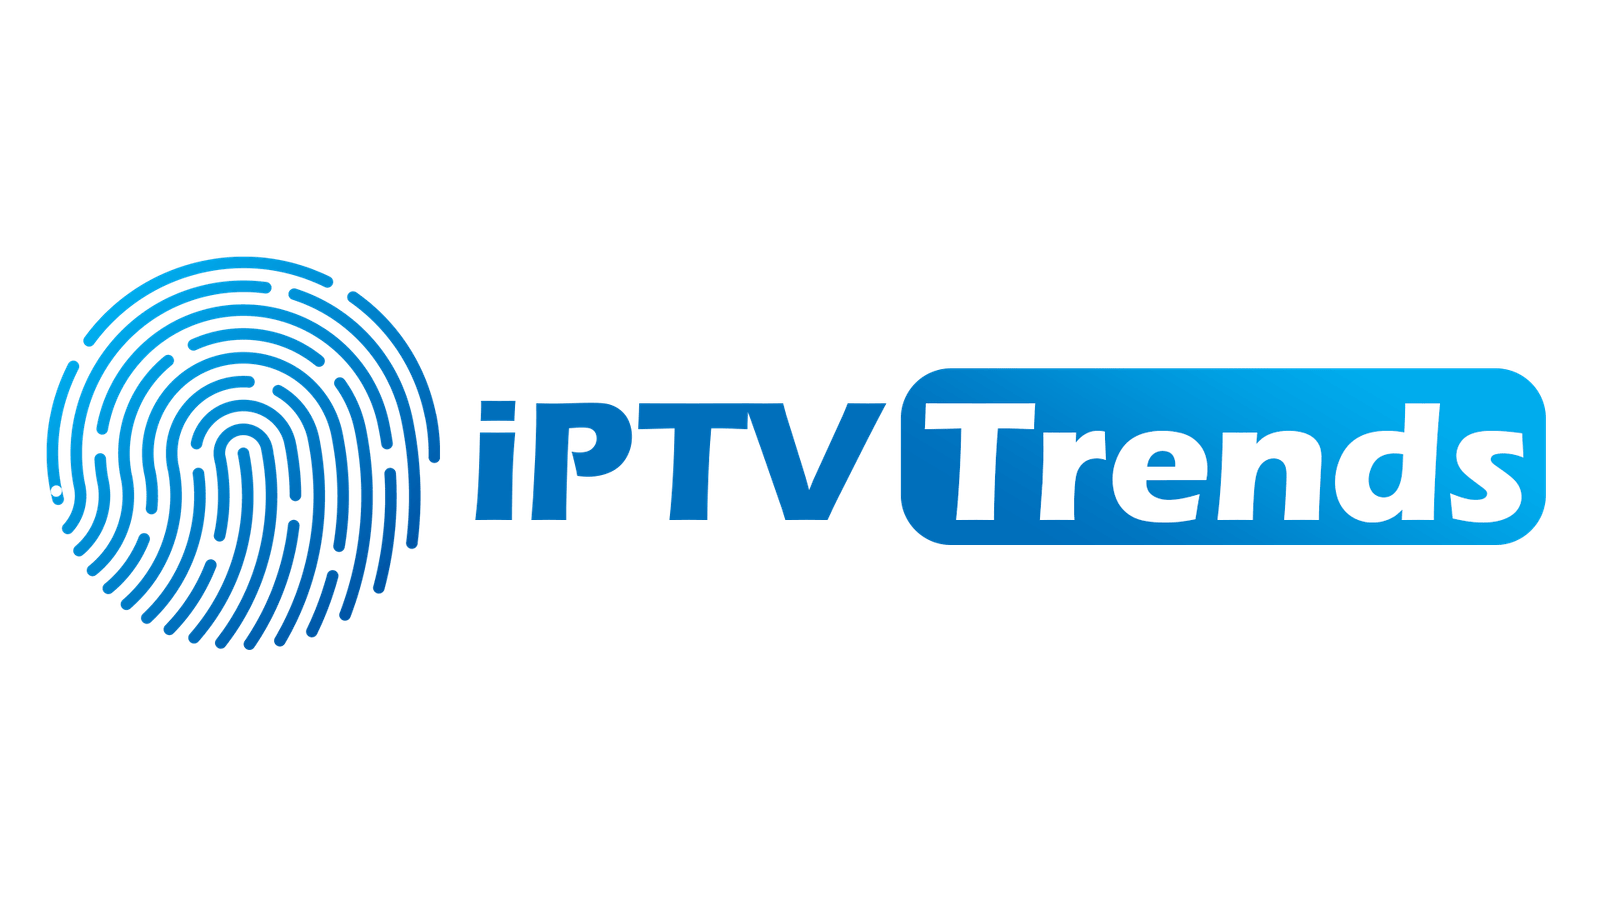 IPTV Trends – Best for Watching live local/international TV channels and paid sports events.